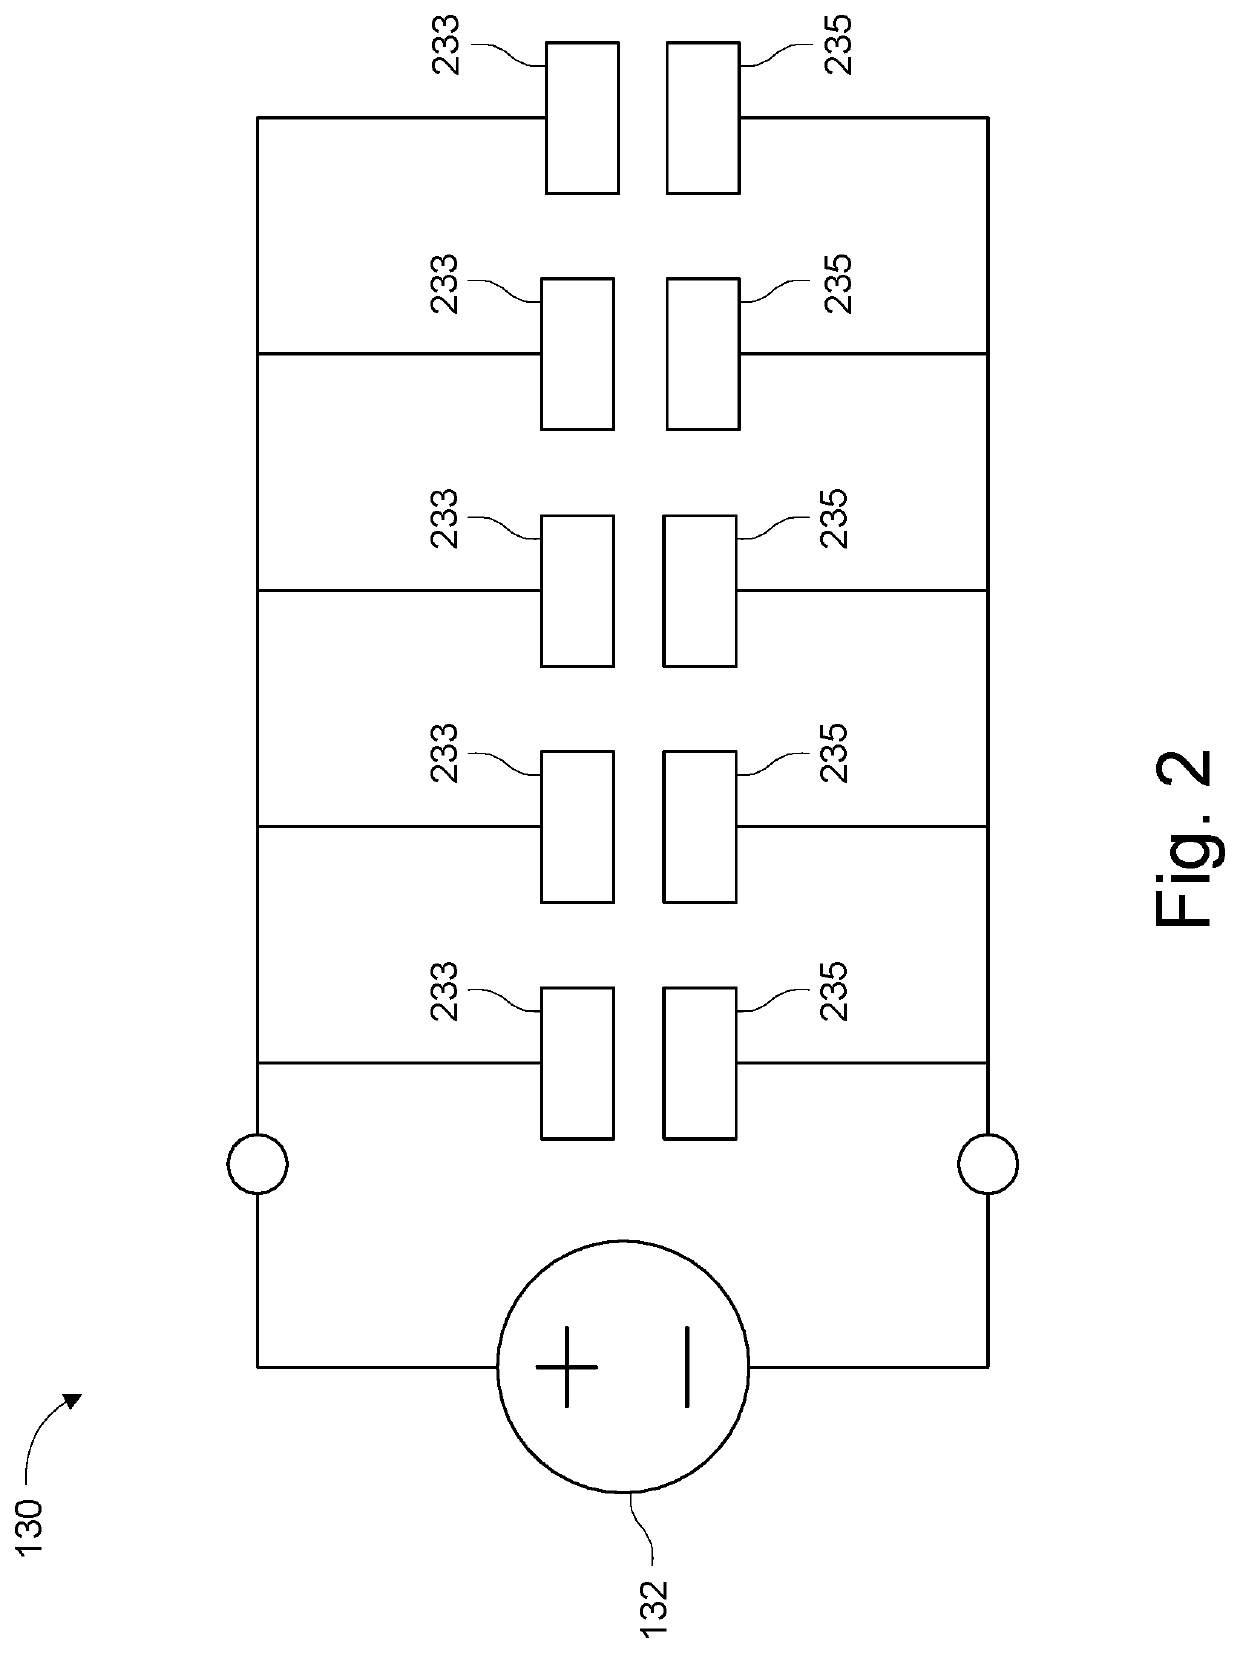 Hybrid interface for simultaneous biosensing and user input